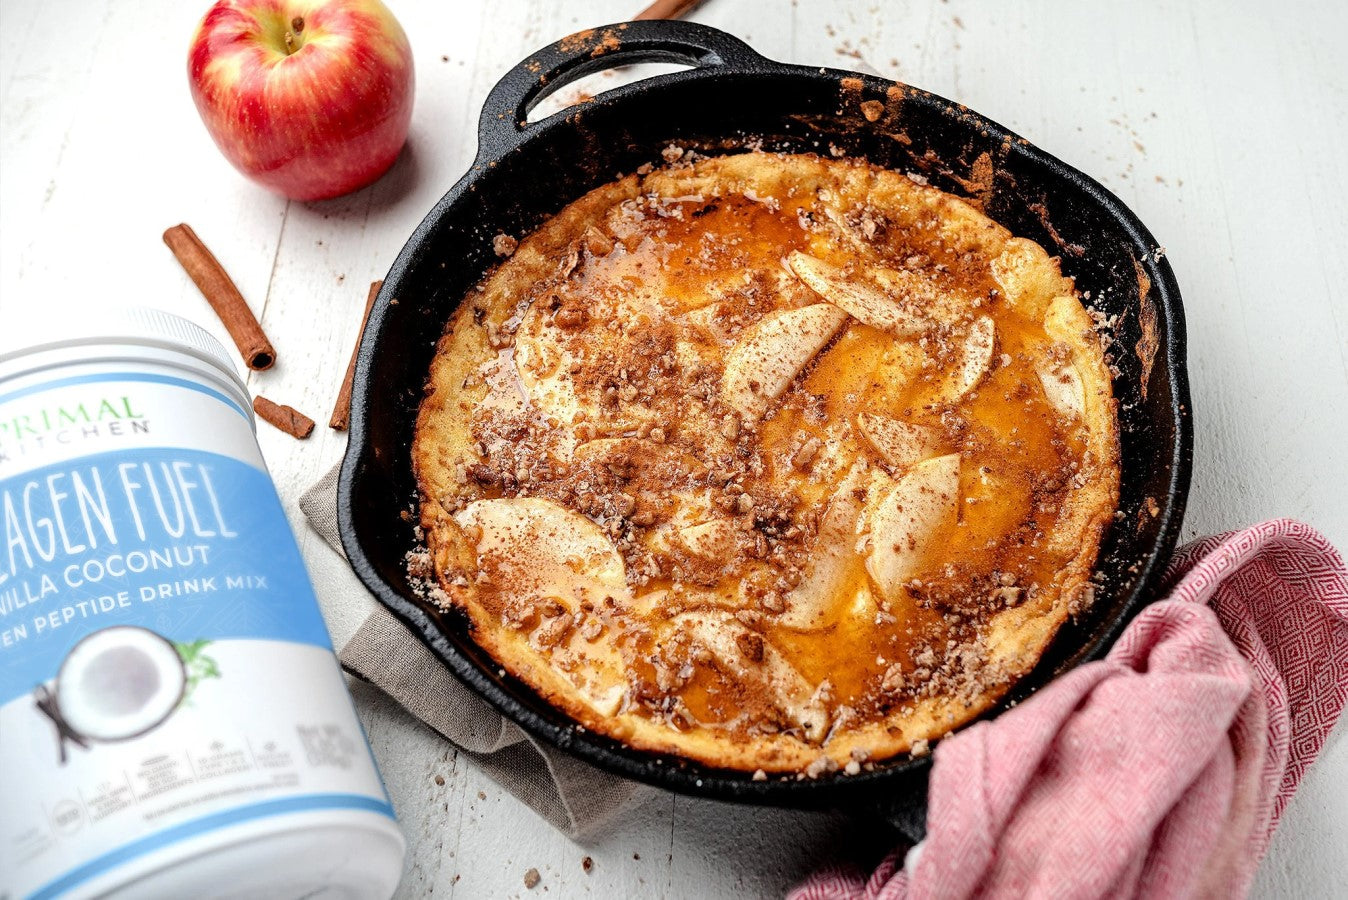 Cast Iron Skillet Of Apple Cinnamon Primal Pancakes With Red Delicious Apple And Cinnamon Sticks Made With Vanilla Coconut Collagen Peptide Powder Recipe Primal Kitchen